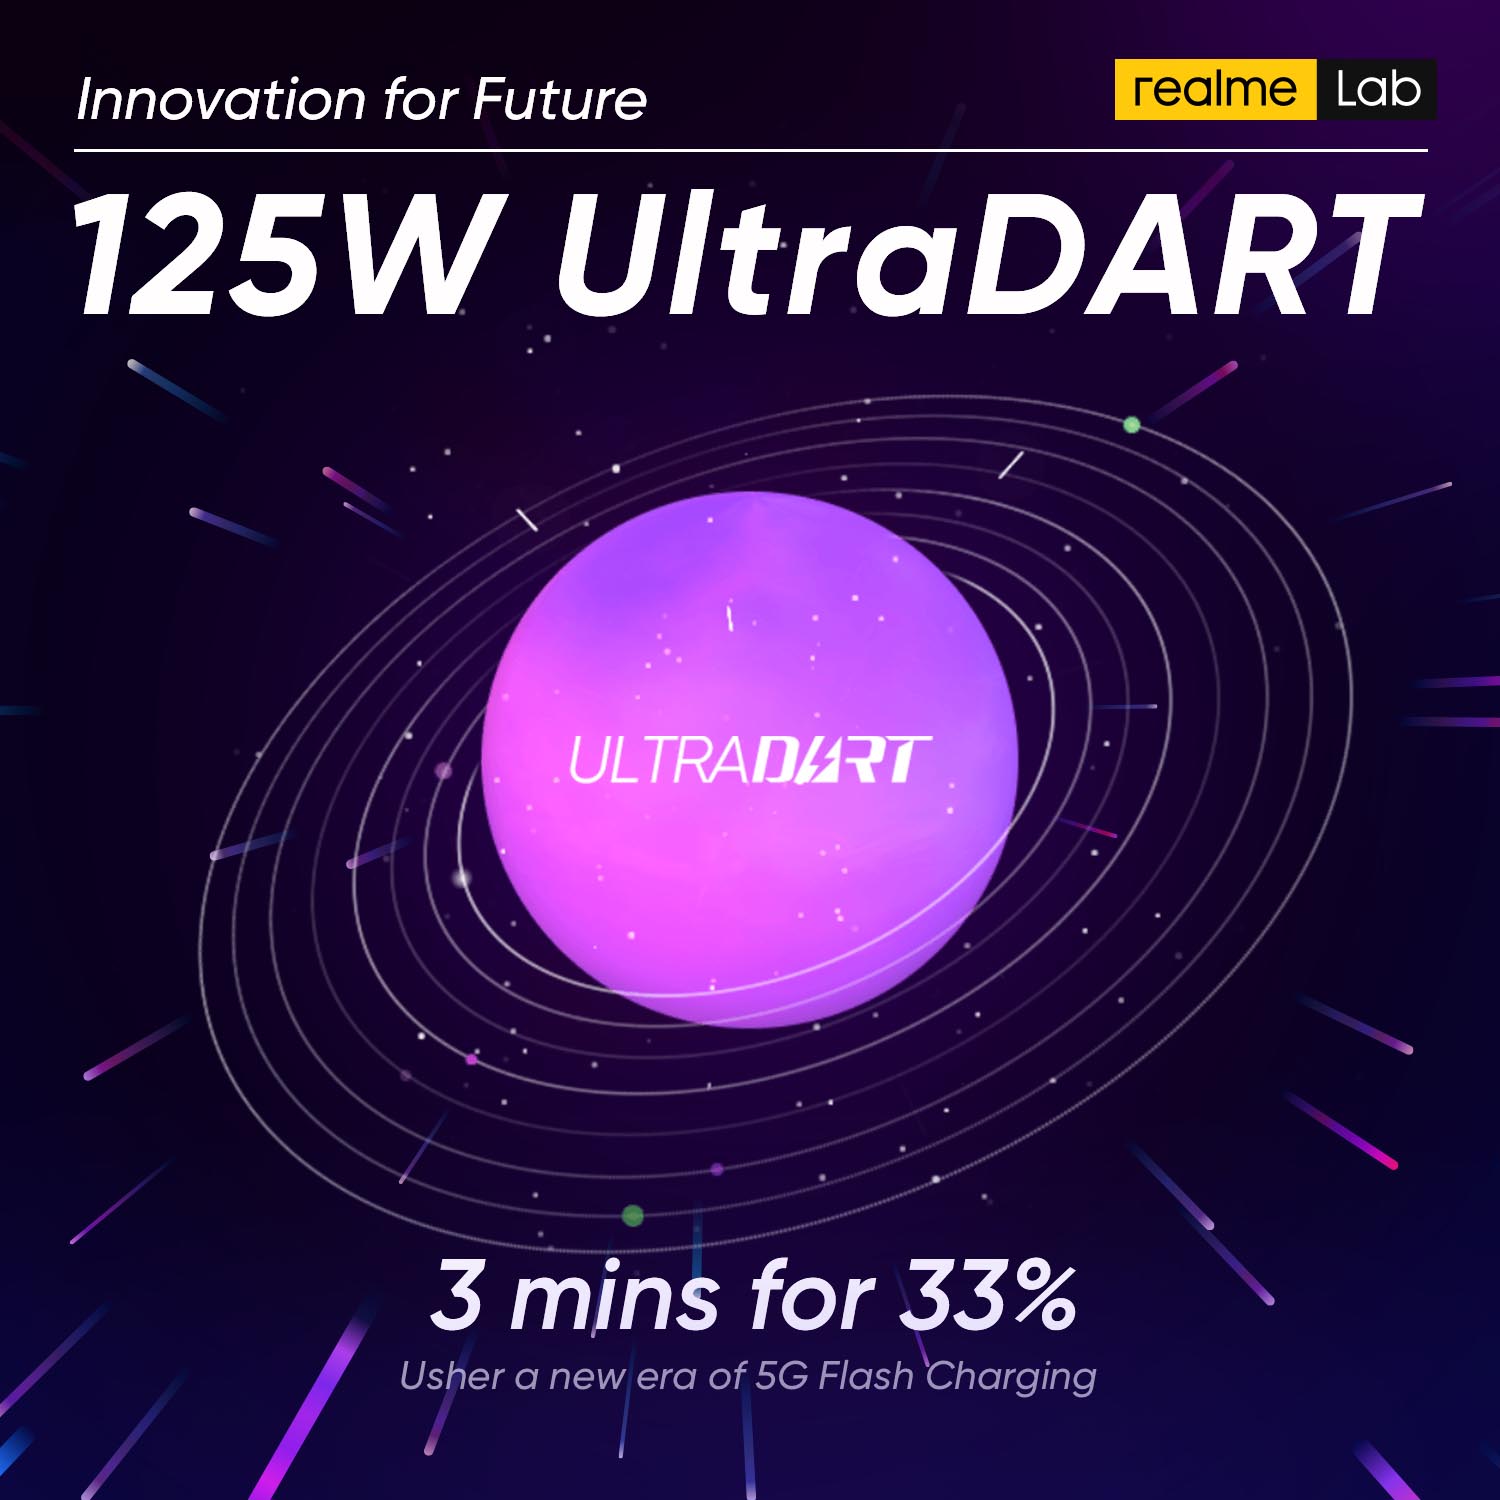 realme unveiled 125W UltraDART Flash Charging technology 33% charged in just three minutes